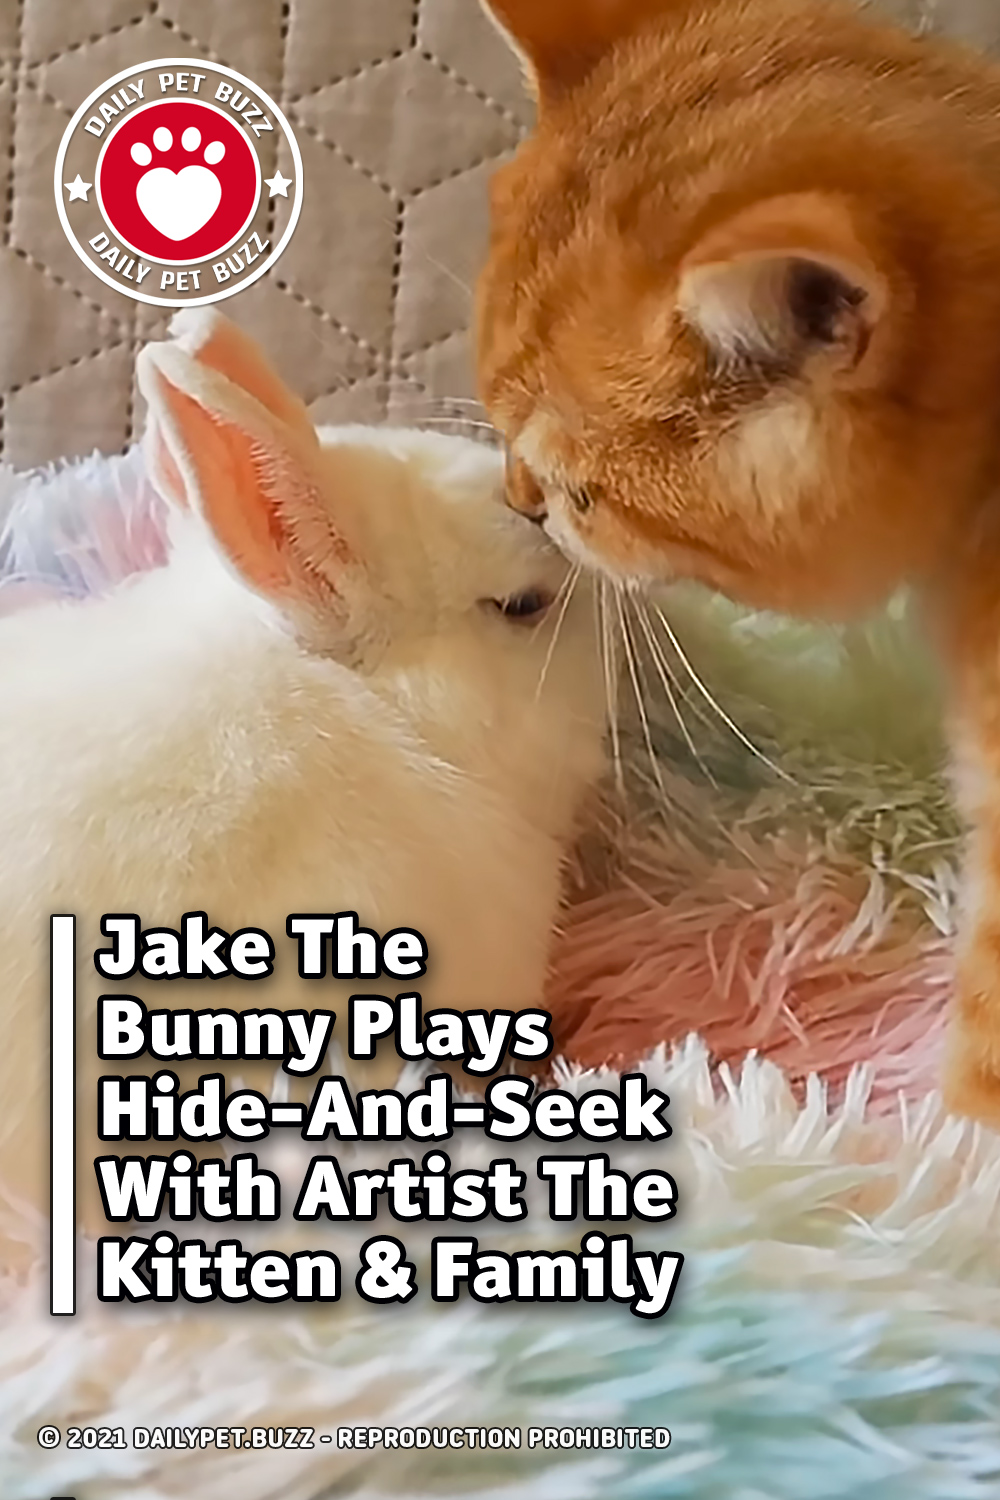 Jake The Bunny Plays Hide-And-Seek With Artist The Kitten & Family